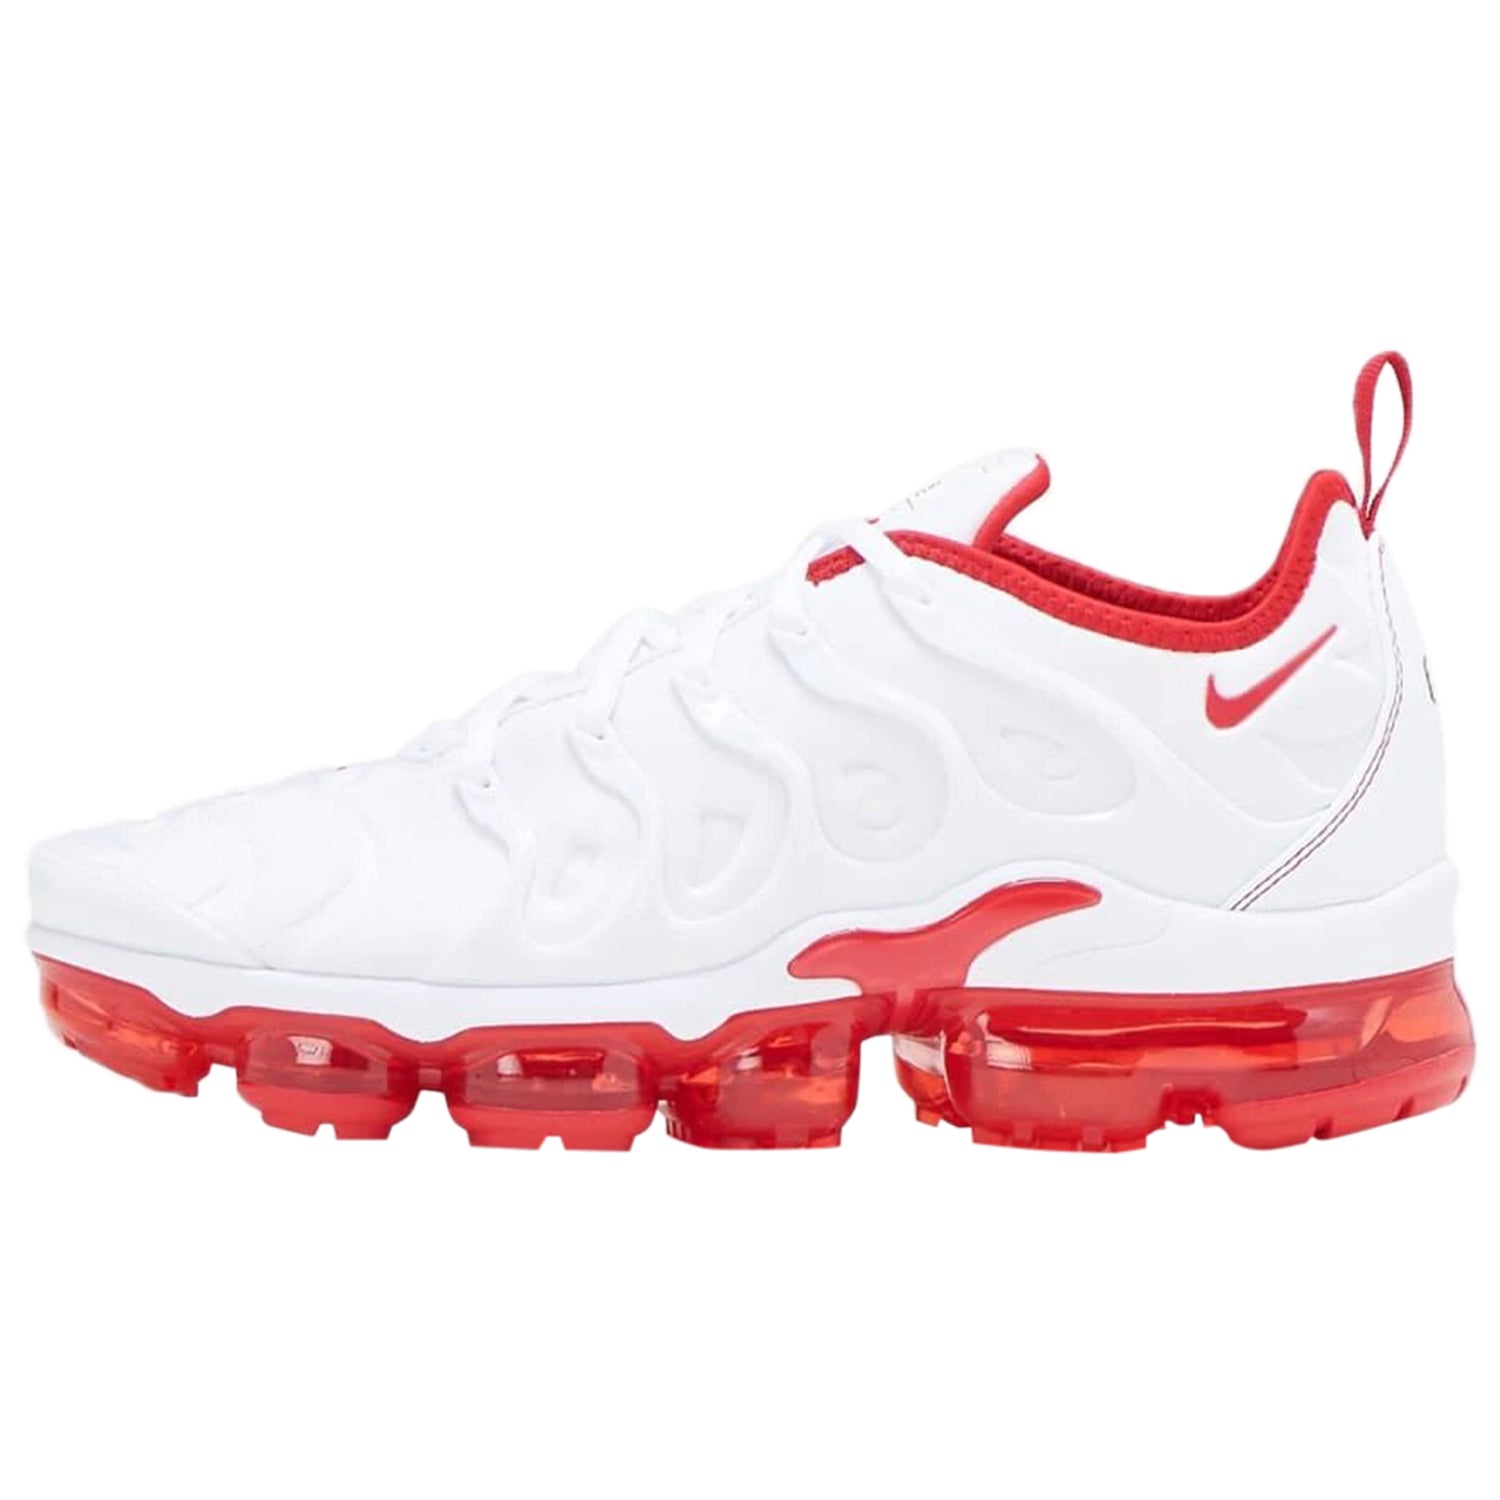 AIR VAPORMAX PLUS Mens Sneaker Style DH0279-100- WHITE UNIVERSITY RED